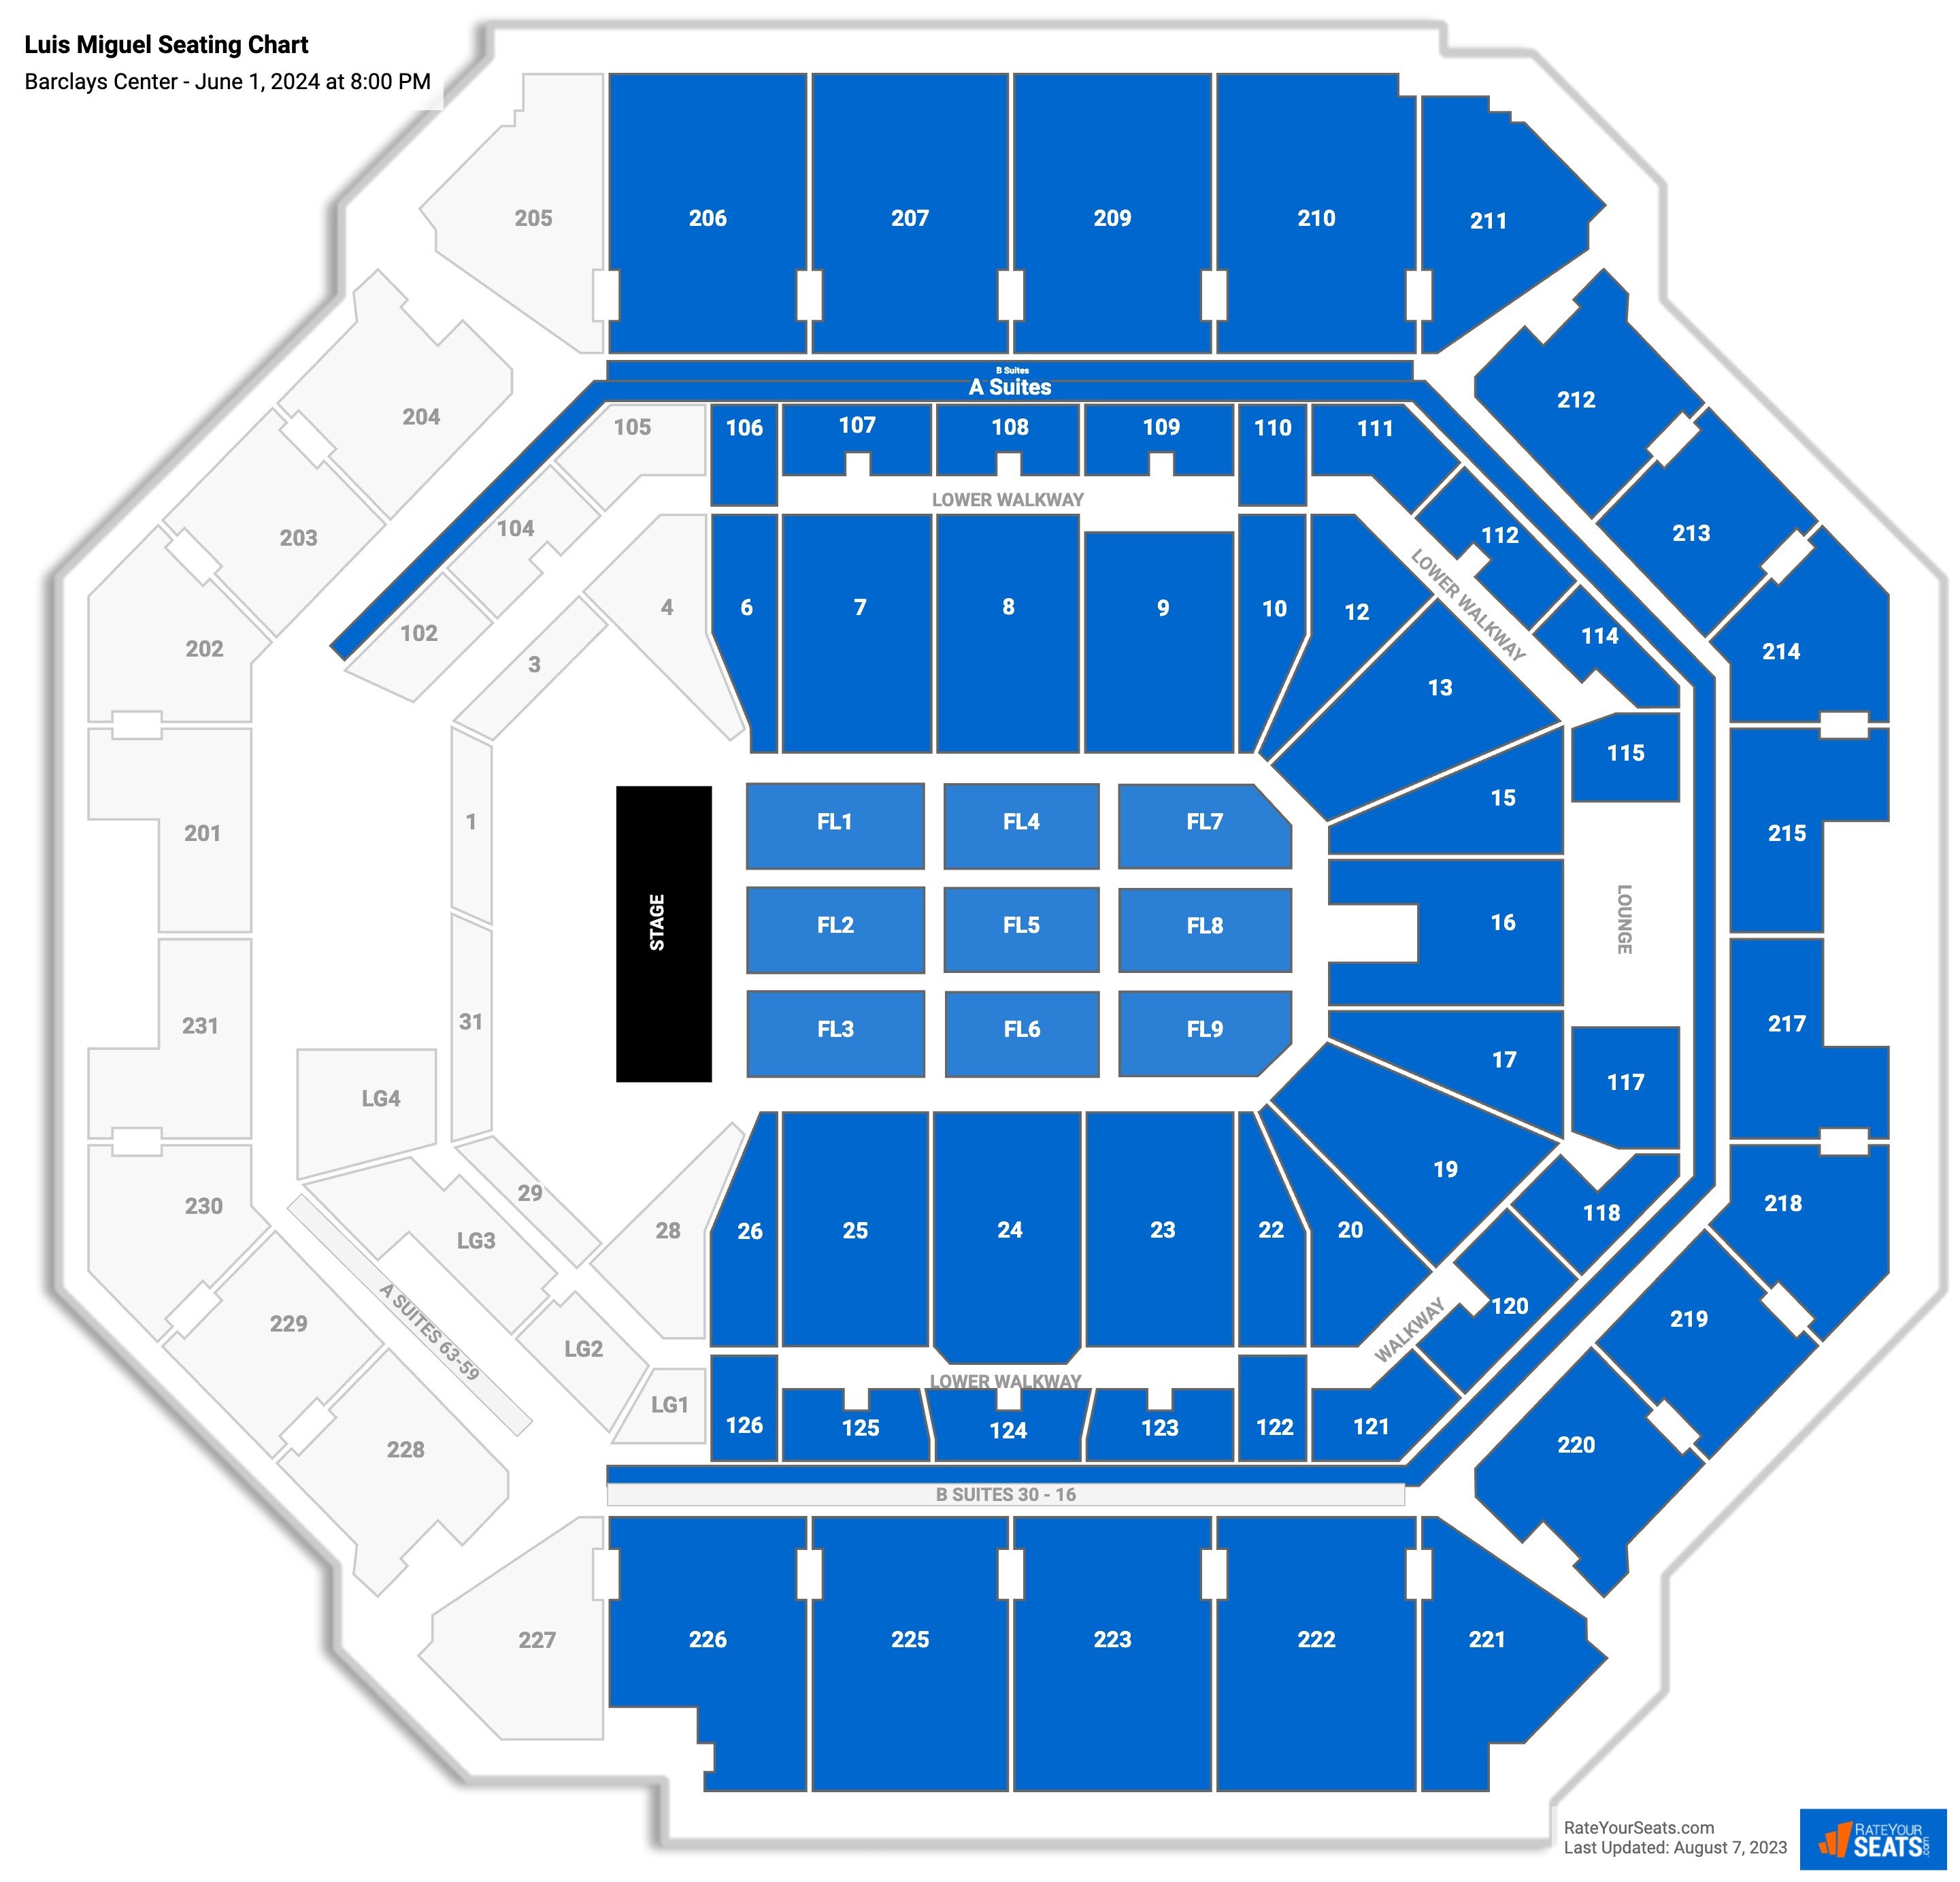 Barclays Center Concert Seating Chart Rateyourseats Com